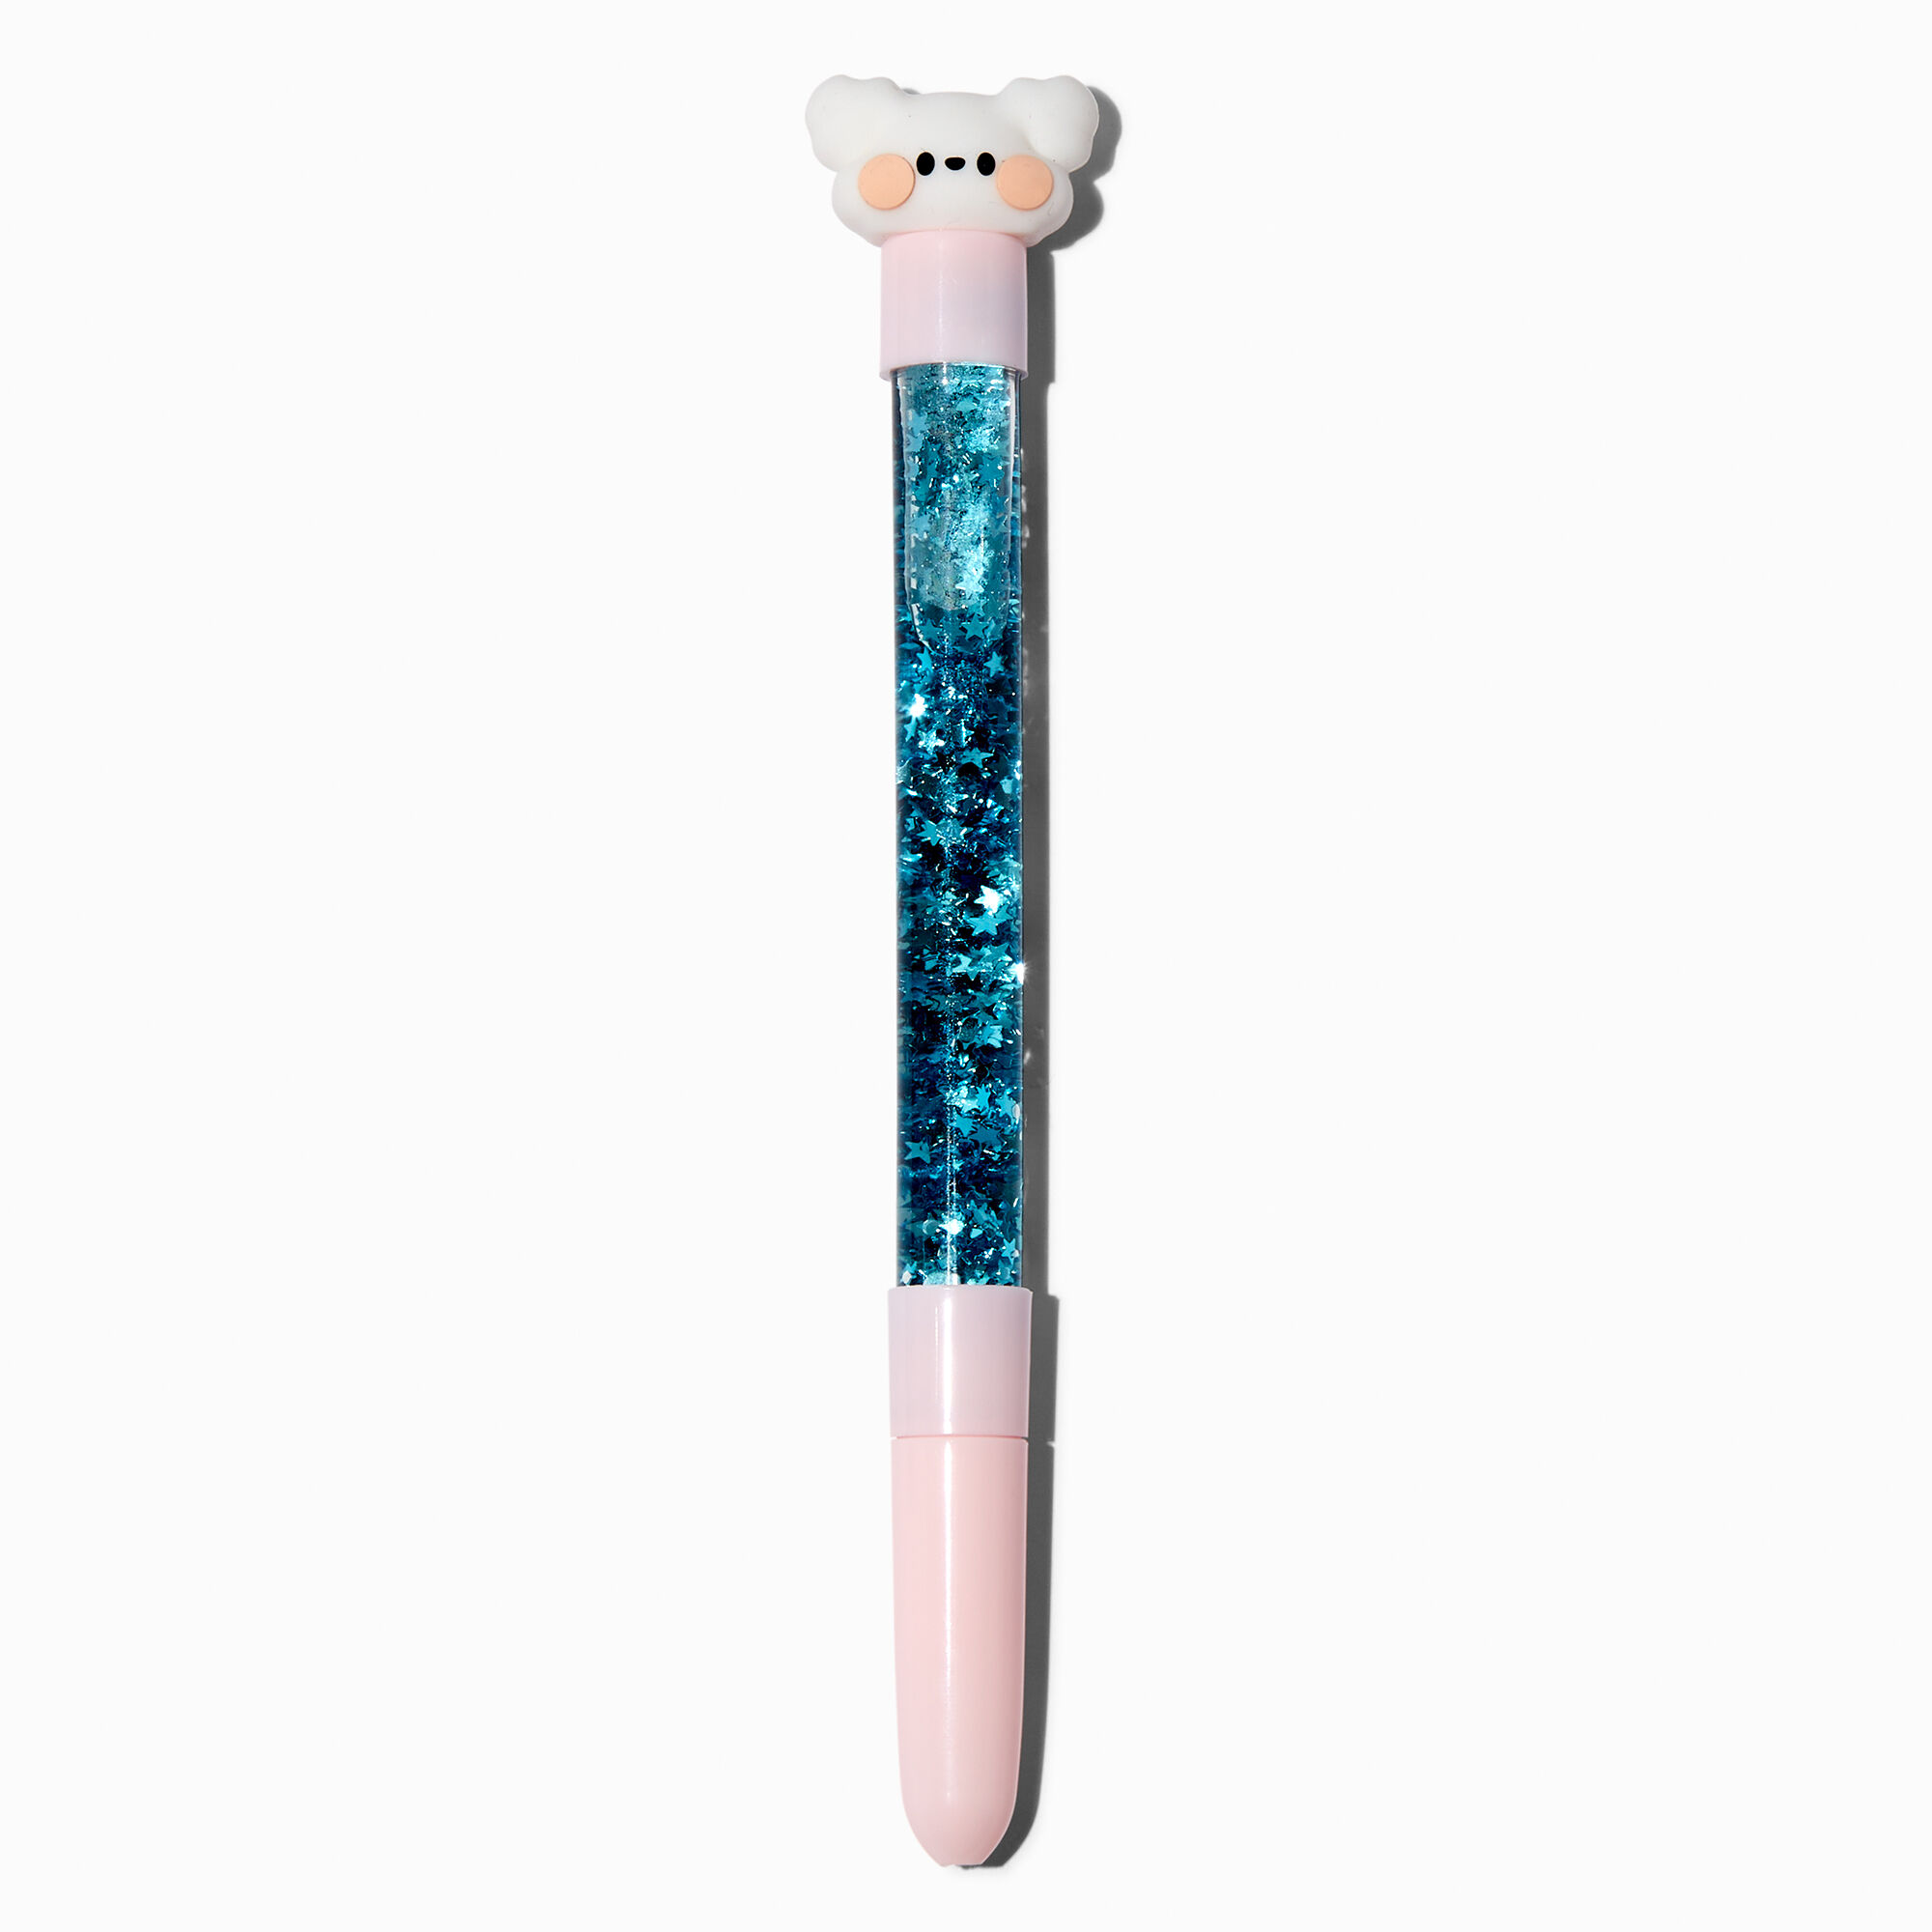 View Claires Maltese WaterFilled Glitter Pen information